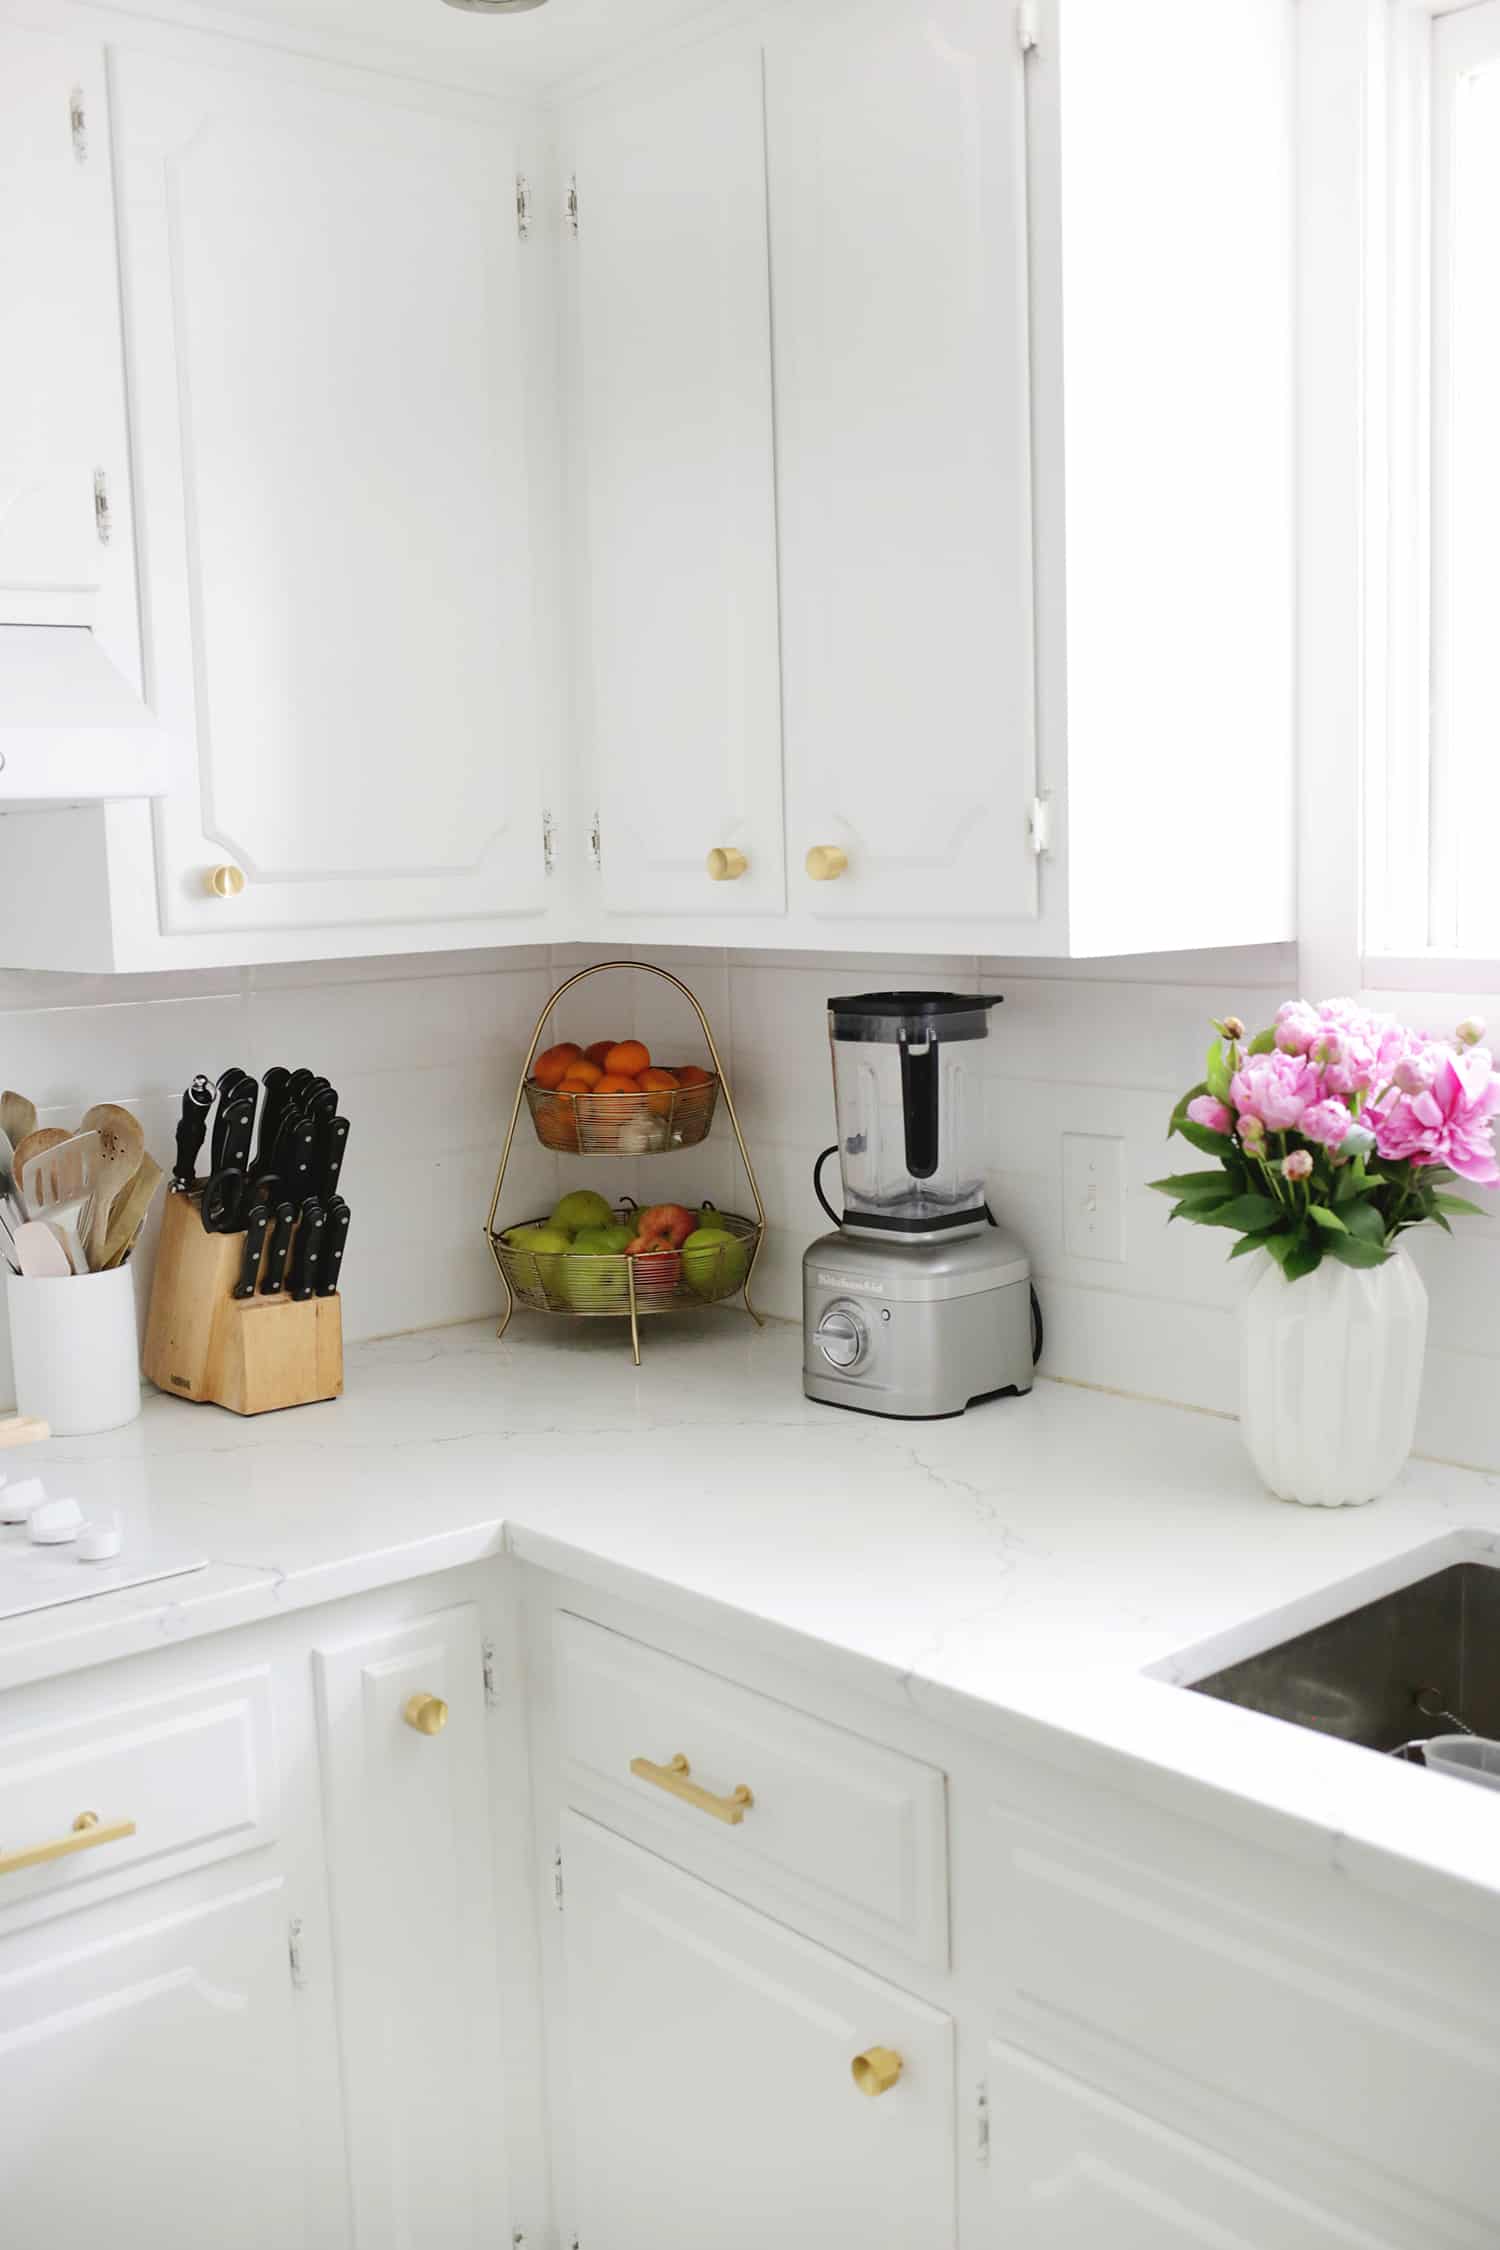 white kitchen with knife, fruit, blender and flowers in vase on white countertop